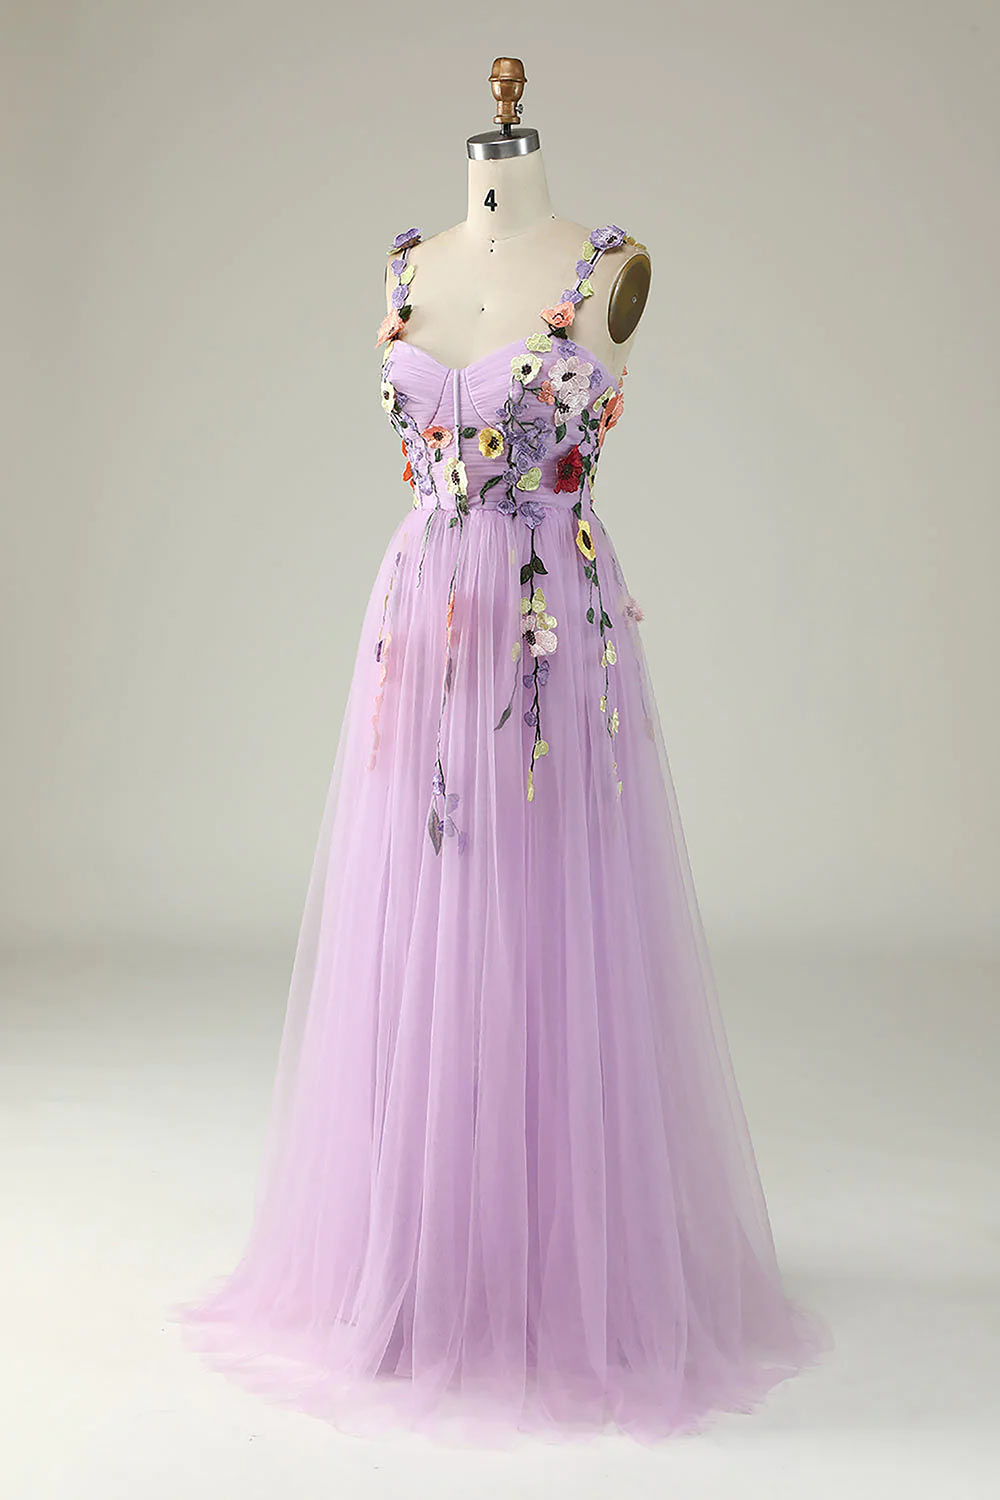 Handmade Party Prom Gown with 3D Flowers, Tulle Spaghetti Straps Prom Dress, A Line Evening Dress, Purple Prom Gown, Custom Formal Prom Gown